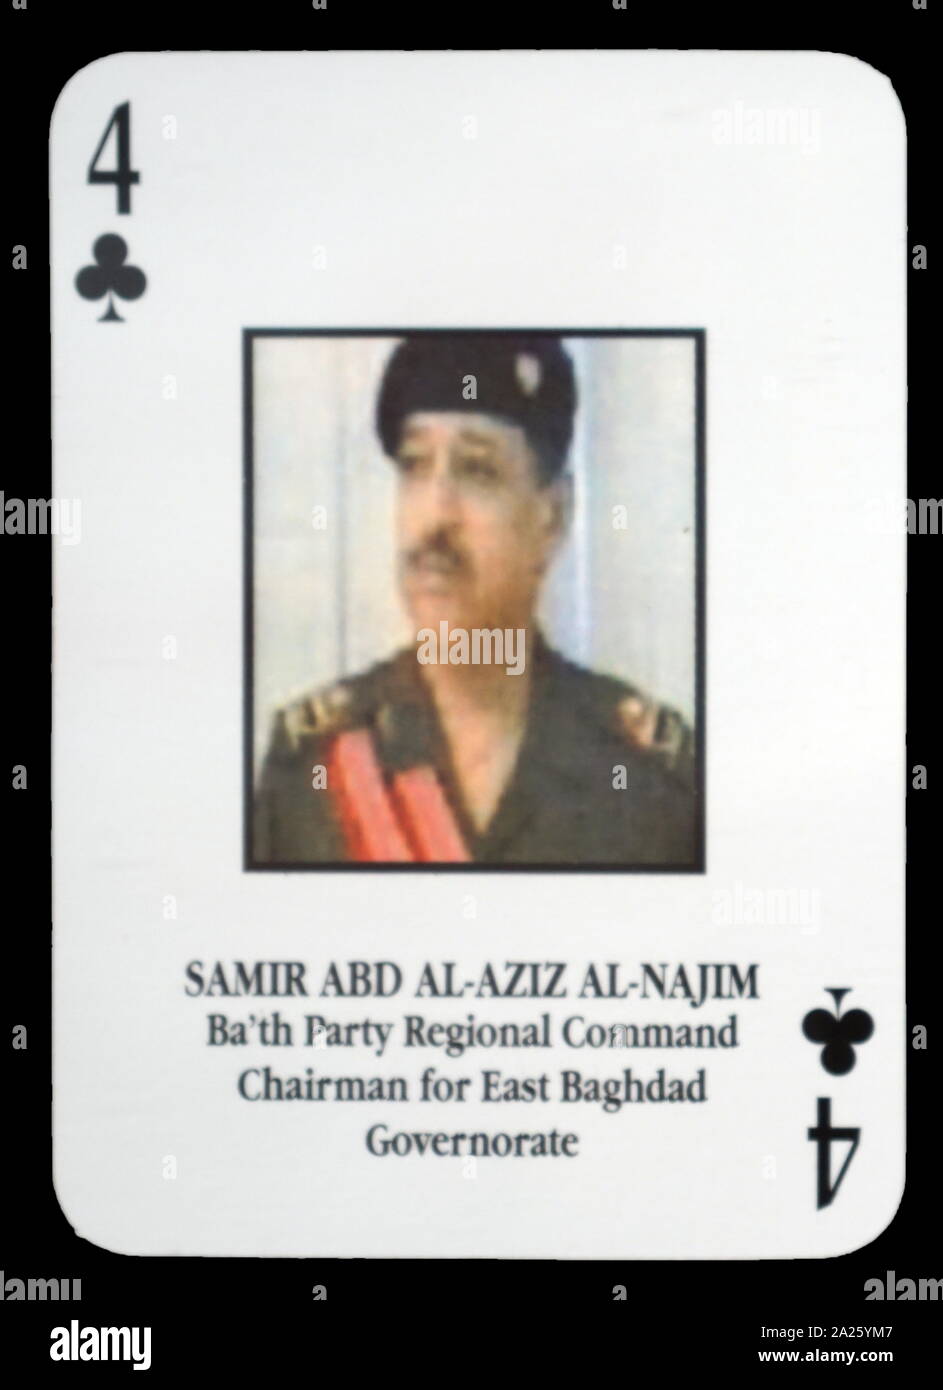 Most-wanted Iraqi playing cards - Samir Abd Al-Aziz Al-Najim (Ba'th Party Regional Command Chairman for East Baghdad Governorate). The U.S. military developed a set of playing cards to help troop identify the most-wanted members of President Saddam Hussein's government during the 2003 invasion of Iraq. Stock Photo